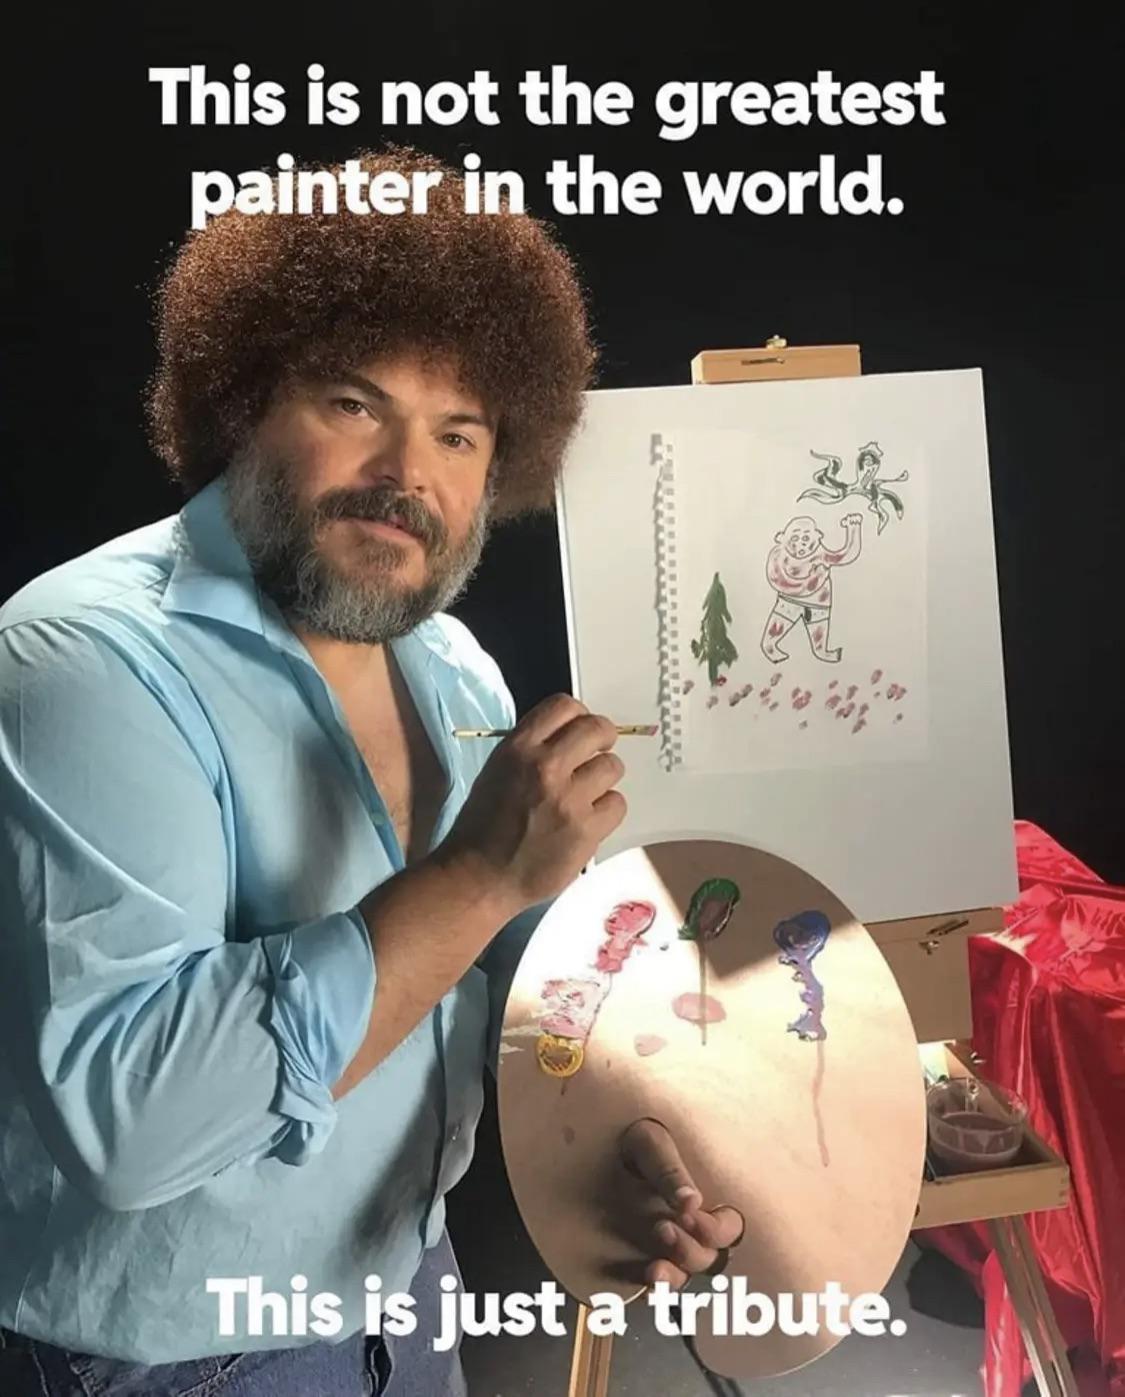 funny memes and pics - not the greatest painter - This is not the greatest painter in the world. This is just a tribute. Whe